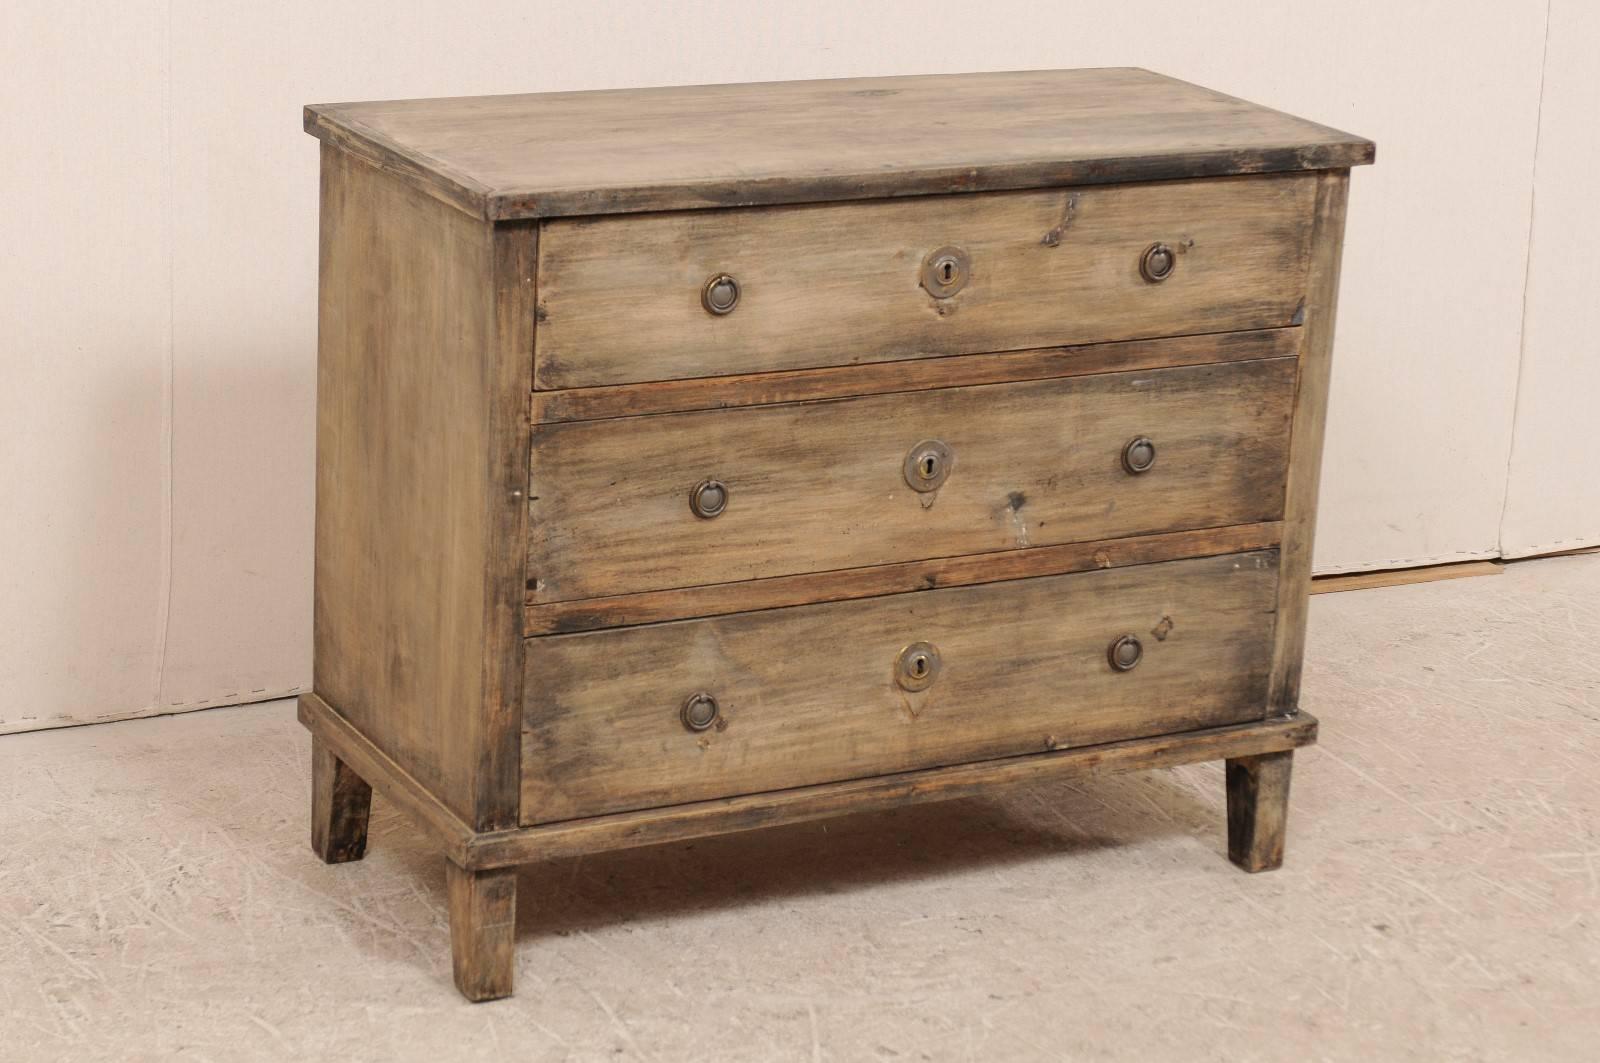 Carved Swedish, 19th Century, Wood Chest with Washes of Grey, Taupe and Dark Brown